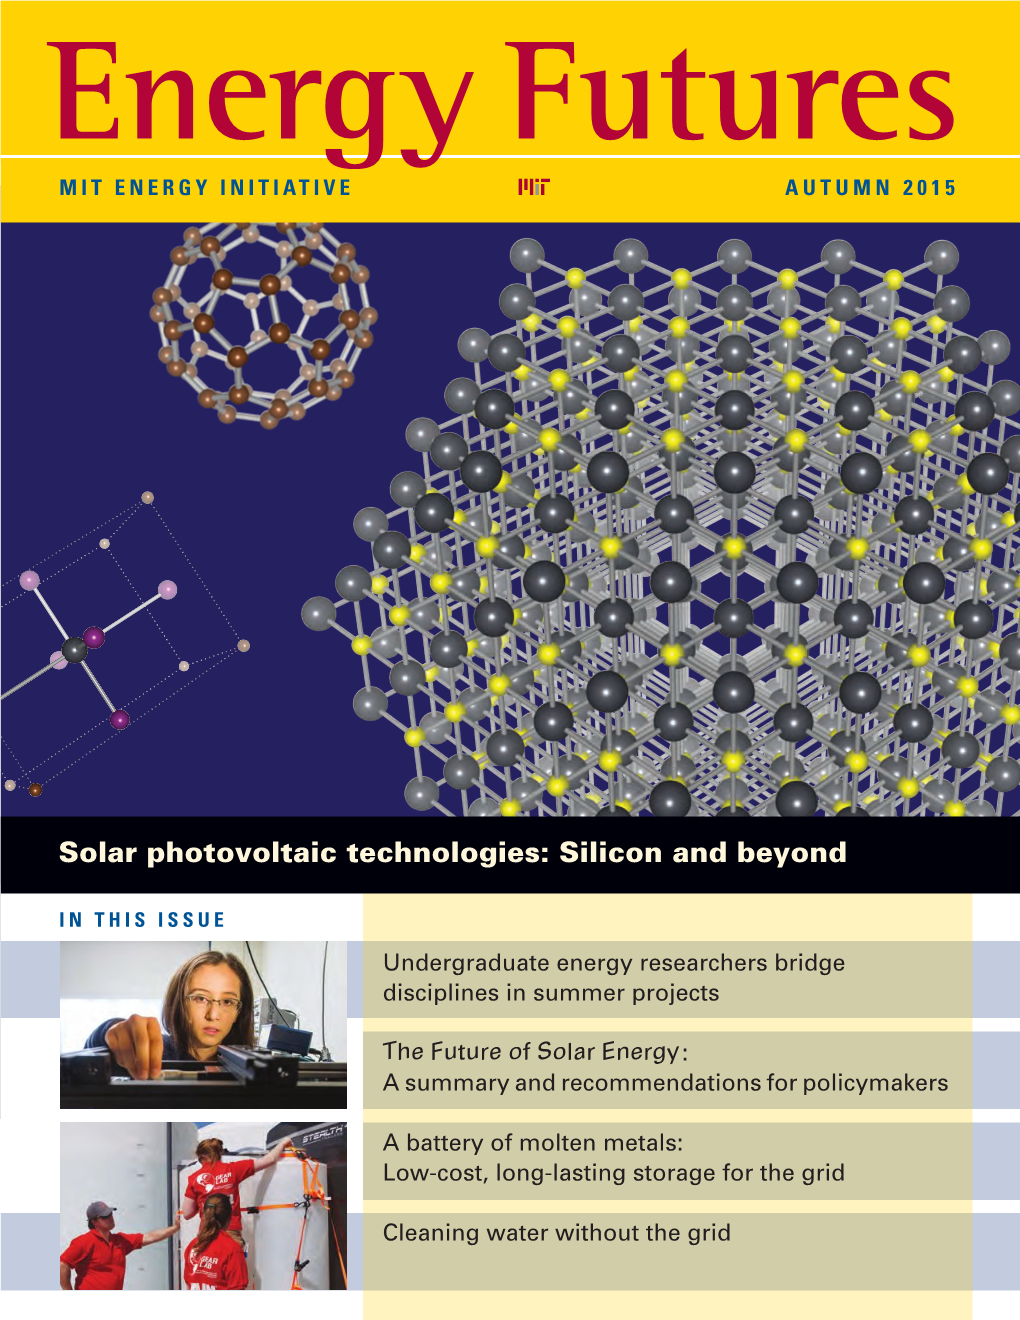 Solar Photovoltaic Technologies: Silicon and Beyond